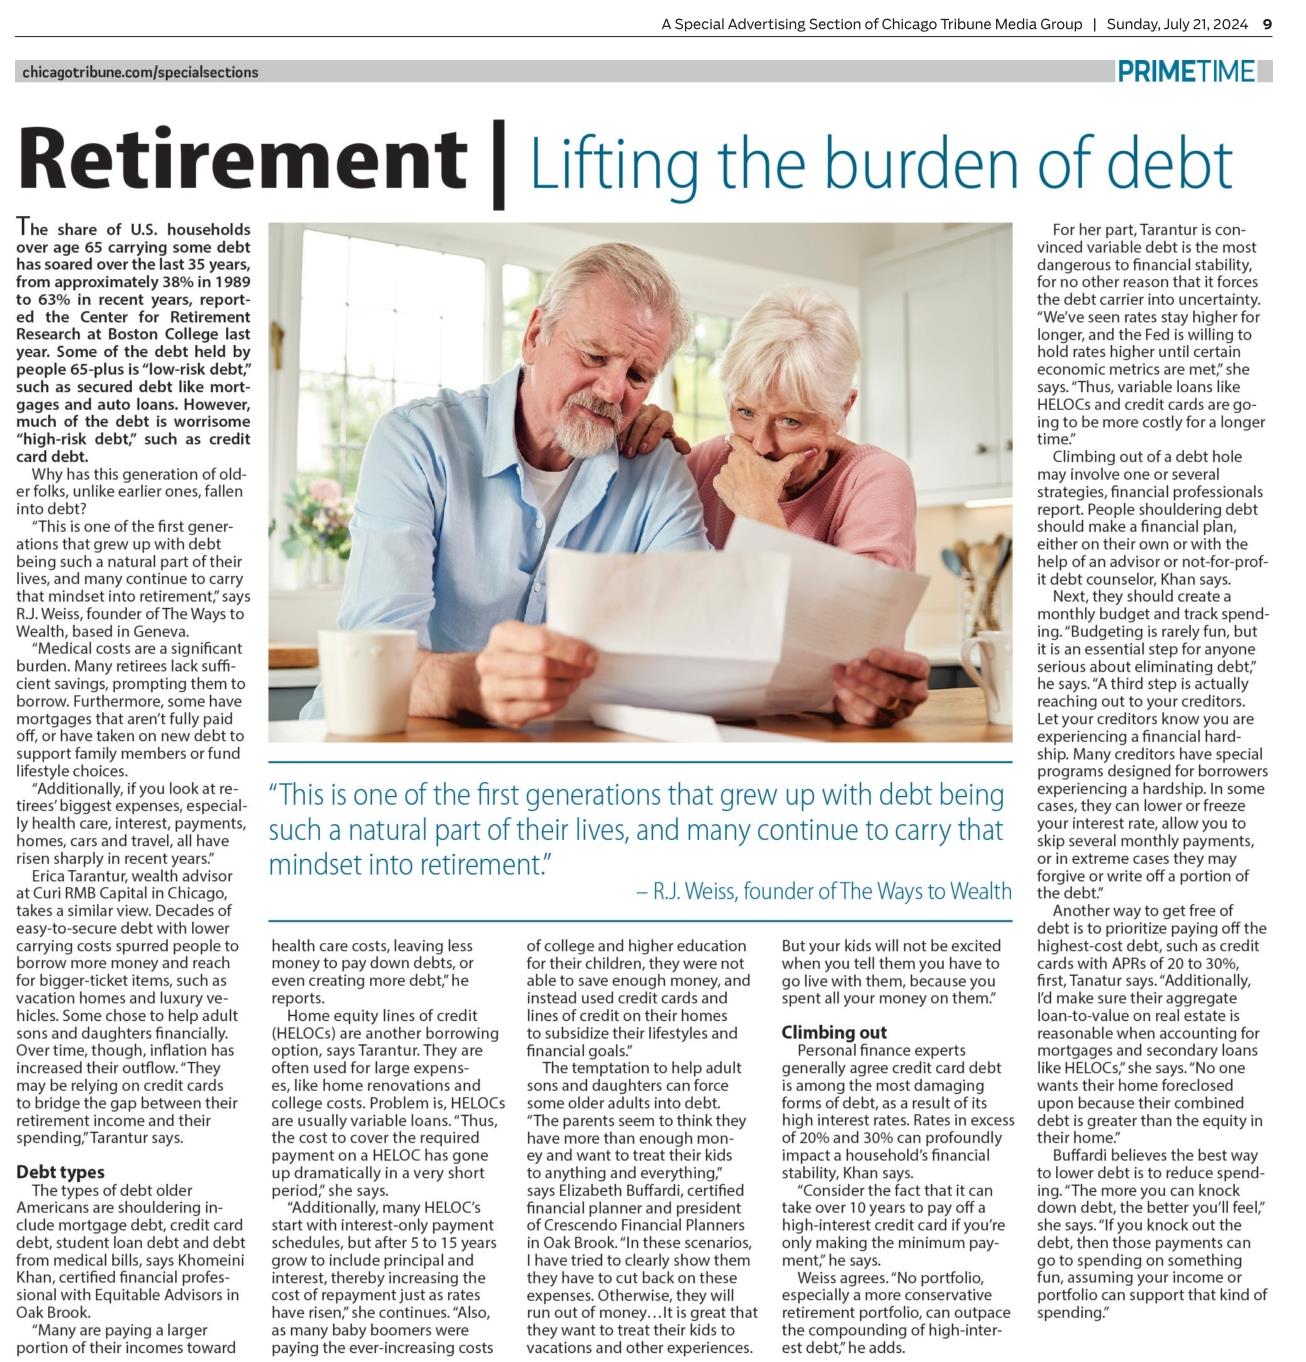 Image of an article in Chicago Tribune on retirement debt